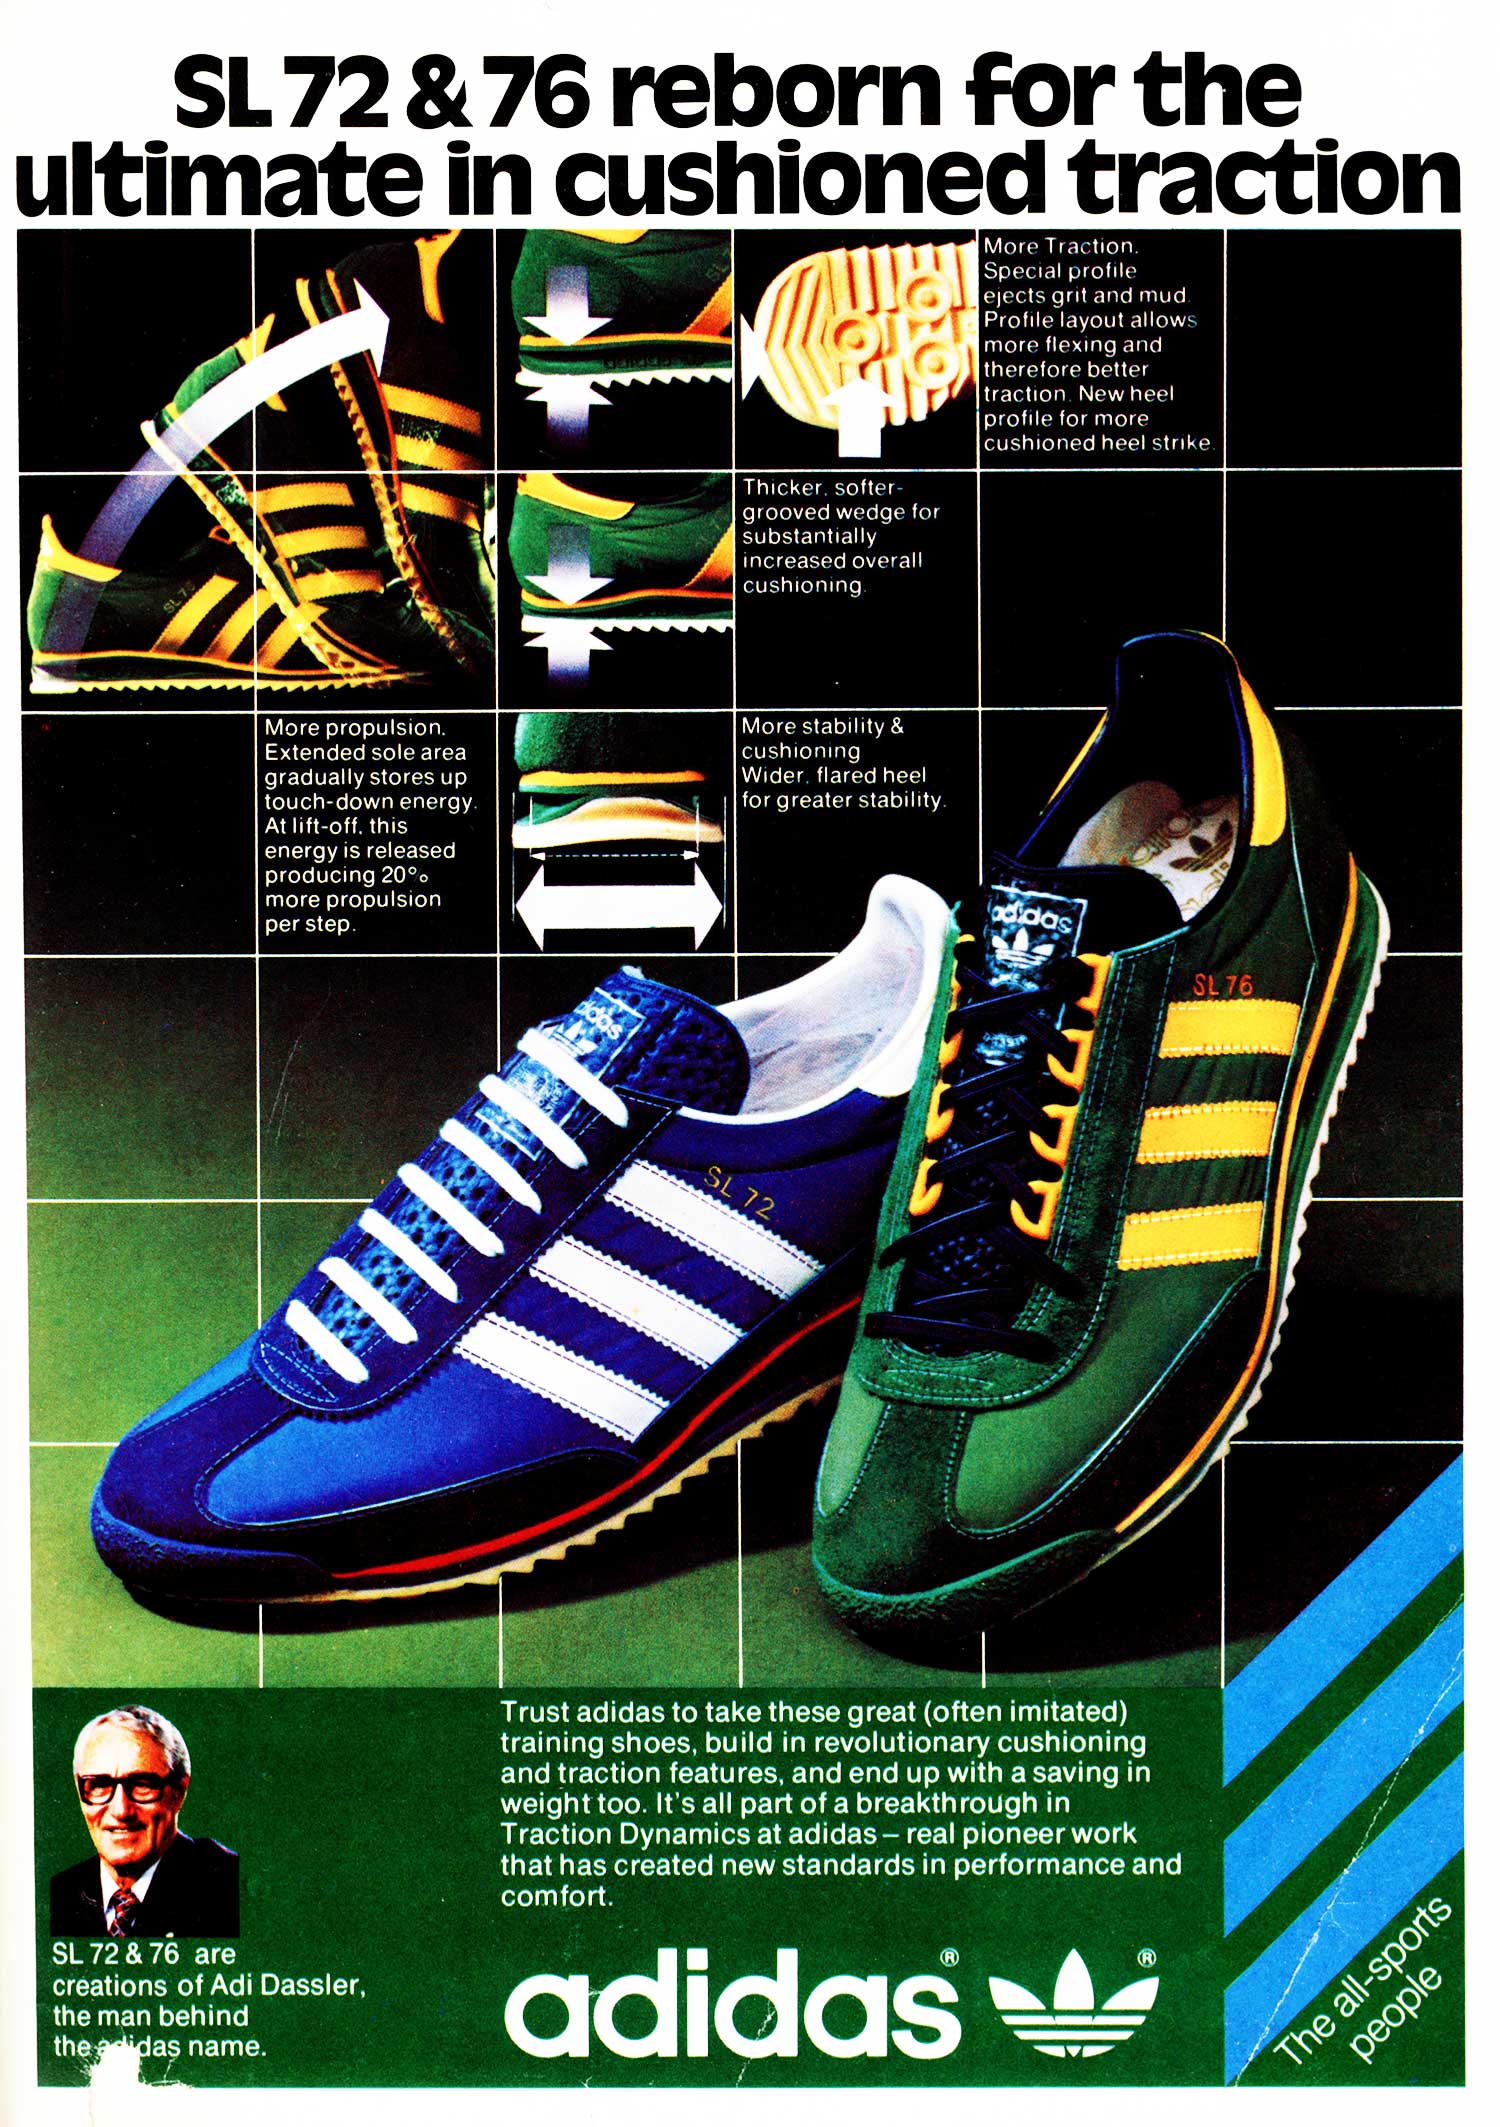 adidas running shoes — The Deffest®. vintage and retro sneaker blog. — Vintage Ads